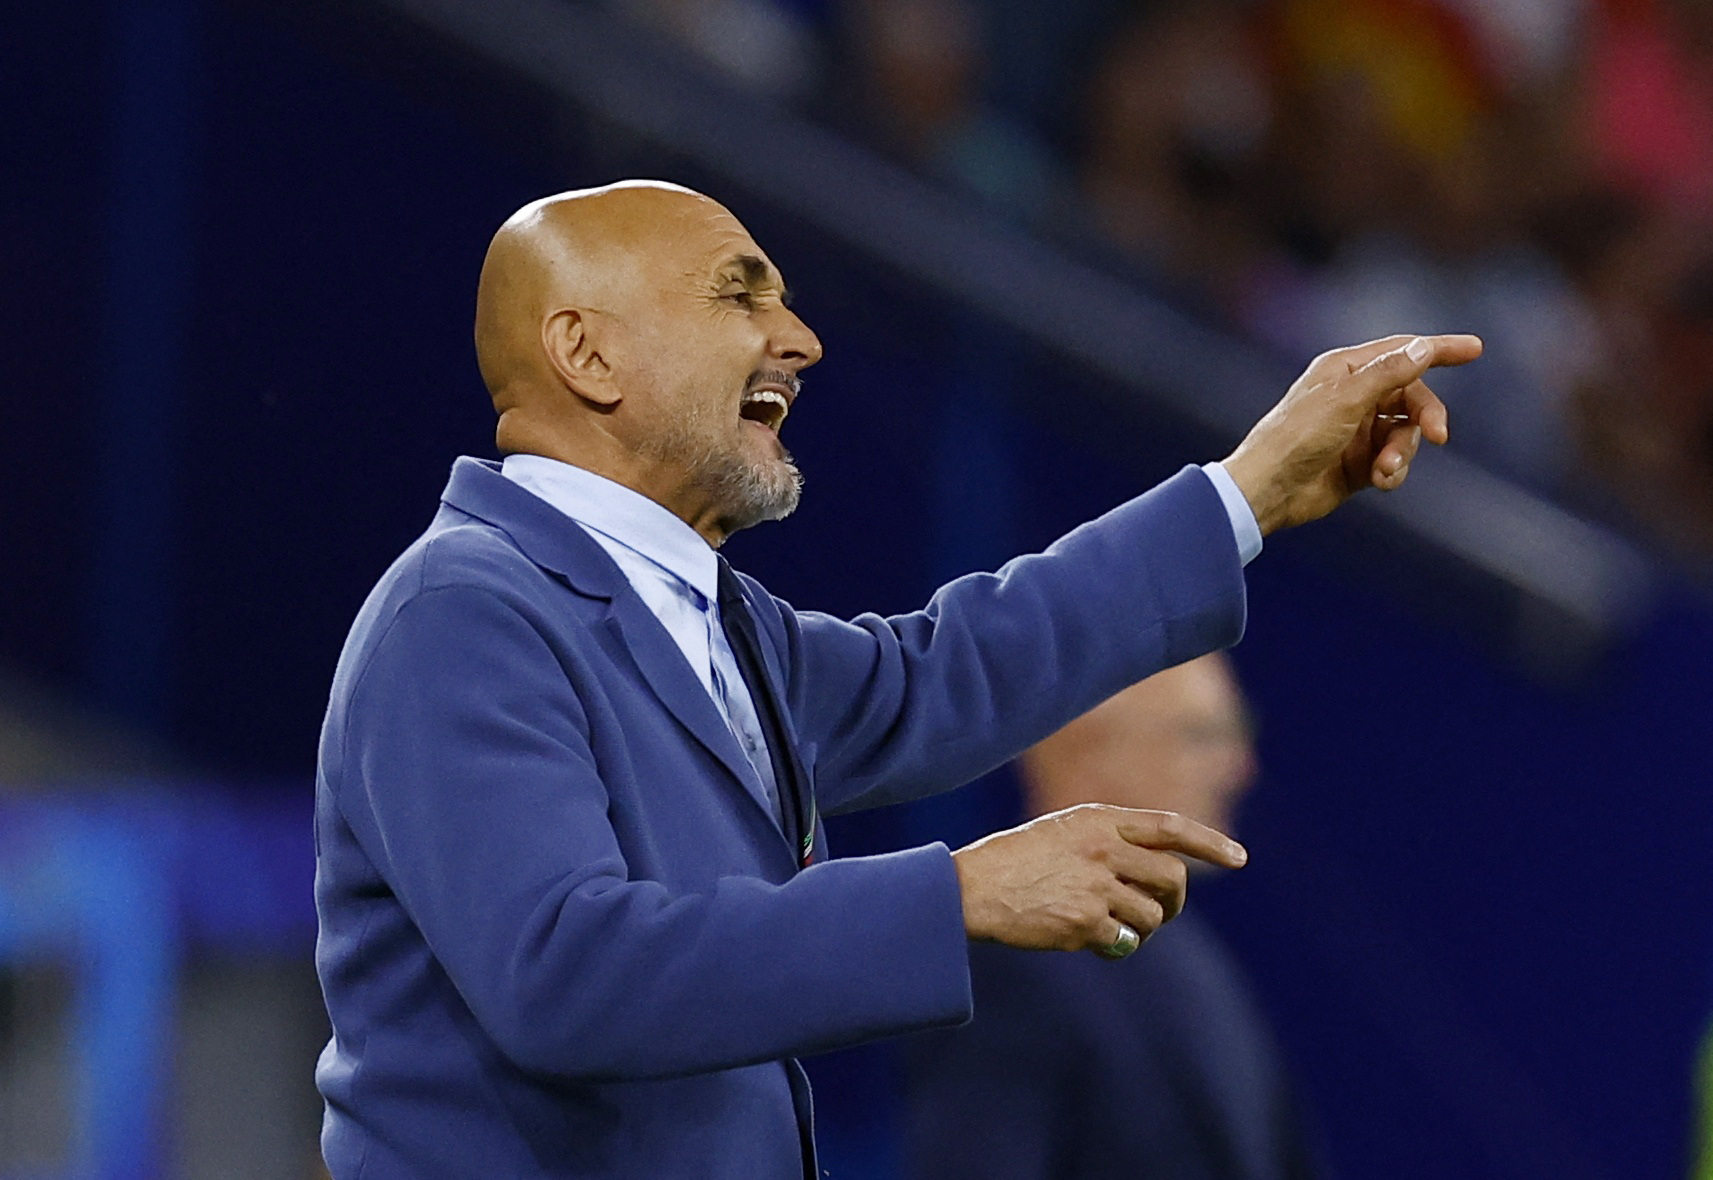 Italy’s Spalletti set to shake things up, Dalic wants to shore Croatia’s leaky defence